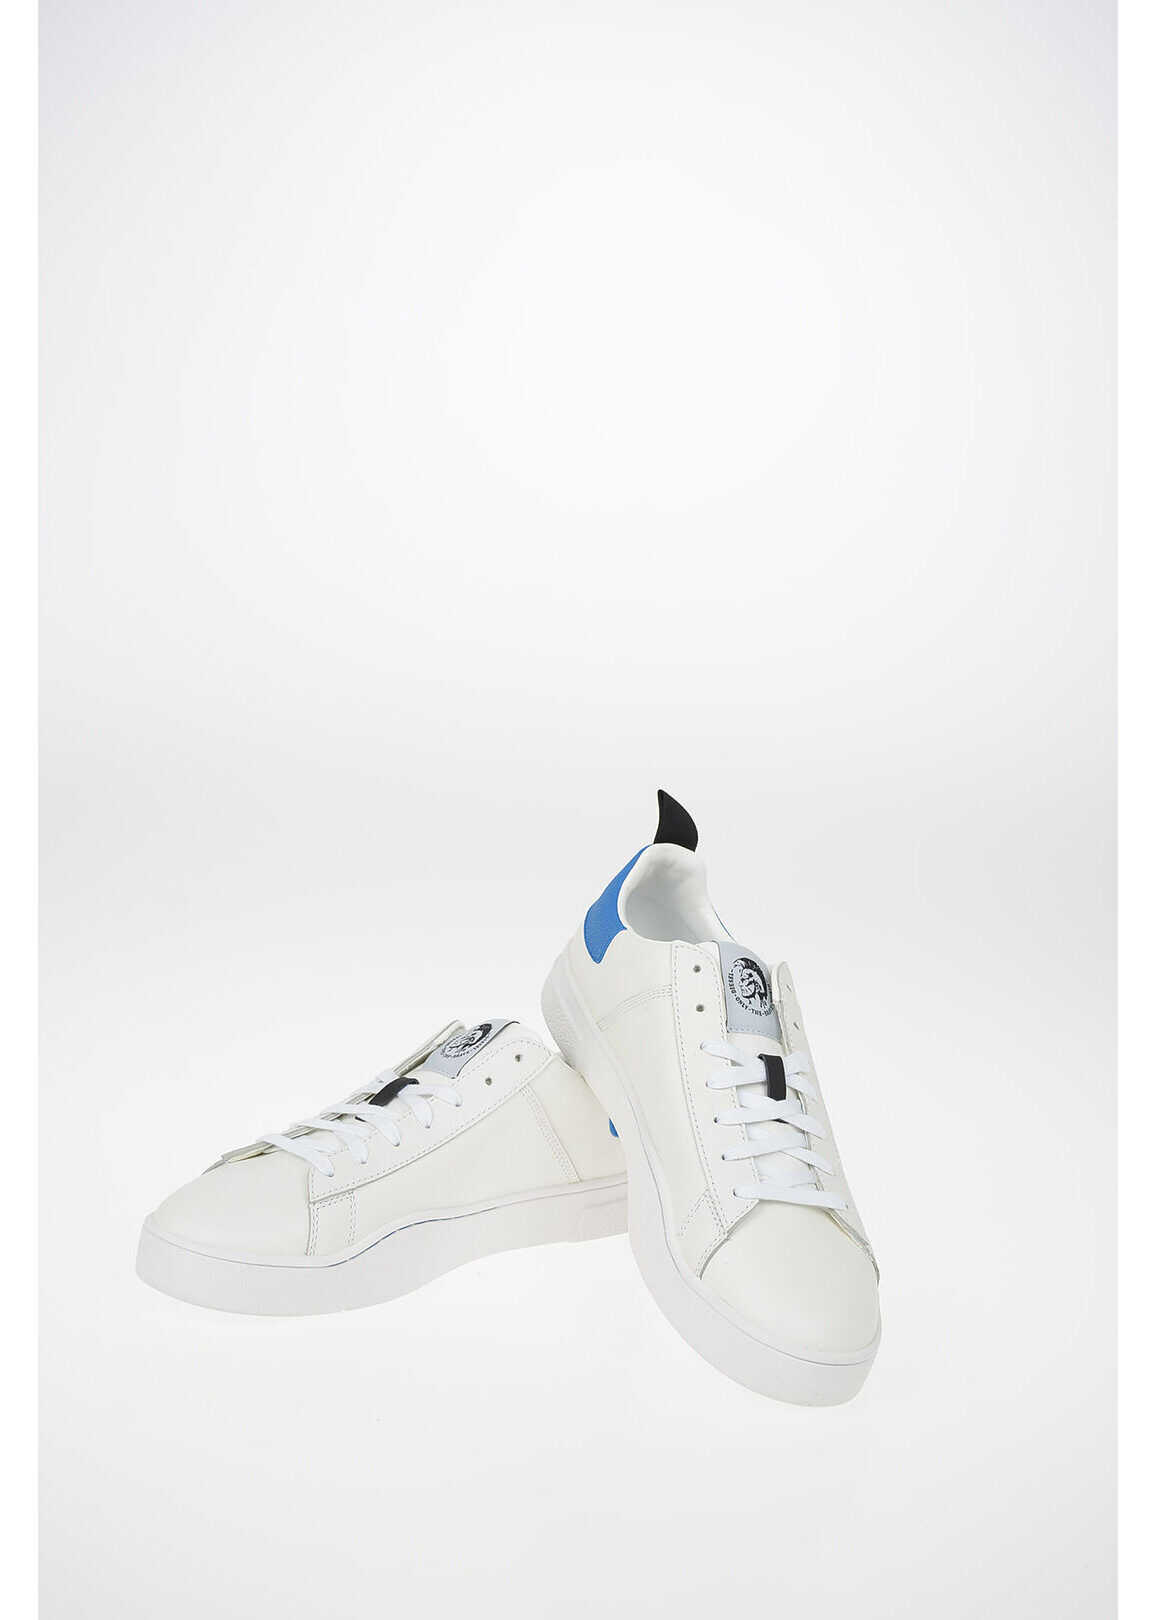 Diesel Leather CLEVER Sneakers* WHITE